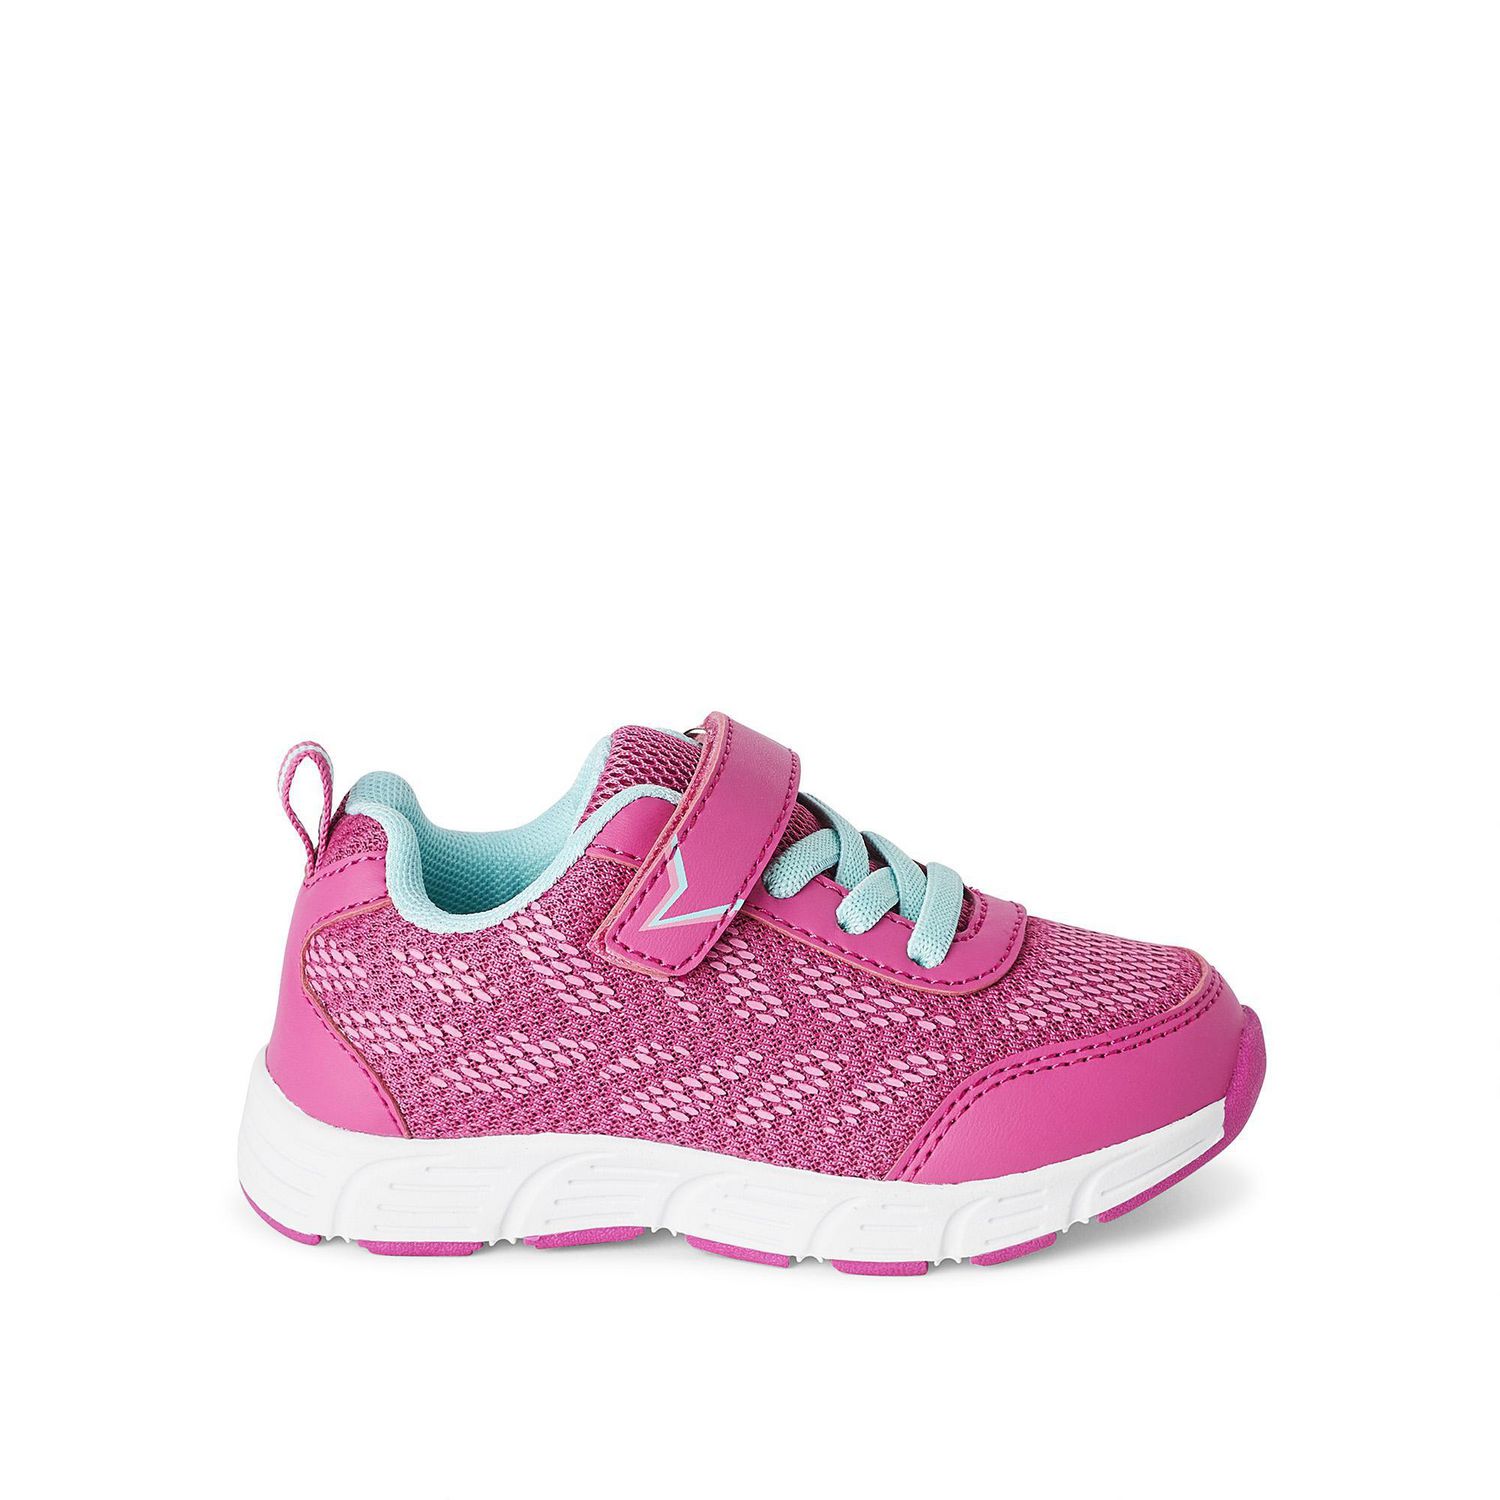 Athletic Works Toddler Girls' Max Sneakers | Walmart Canada